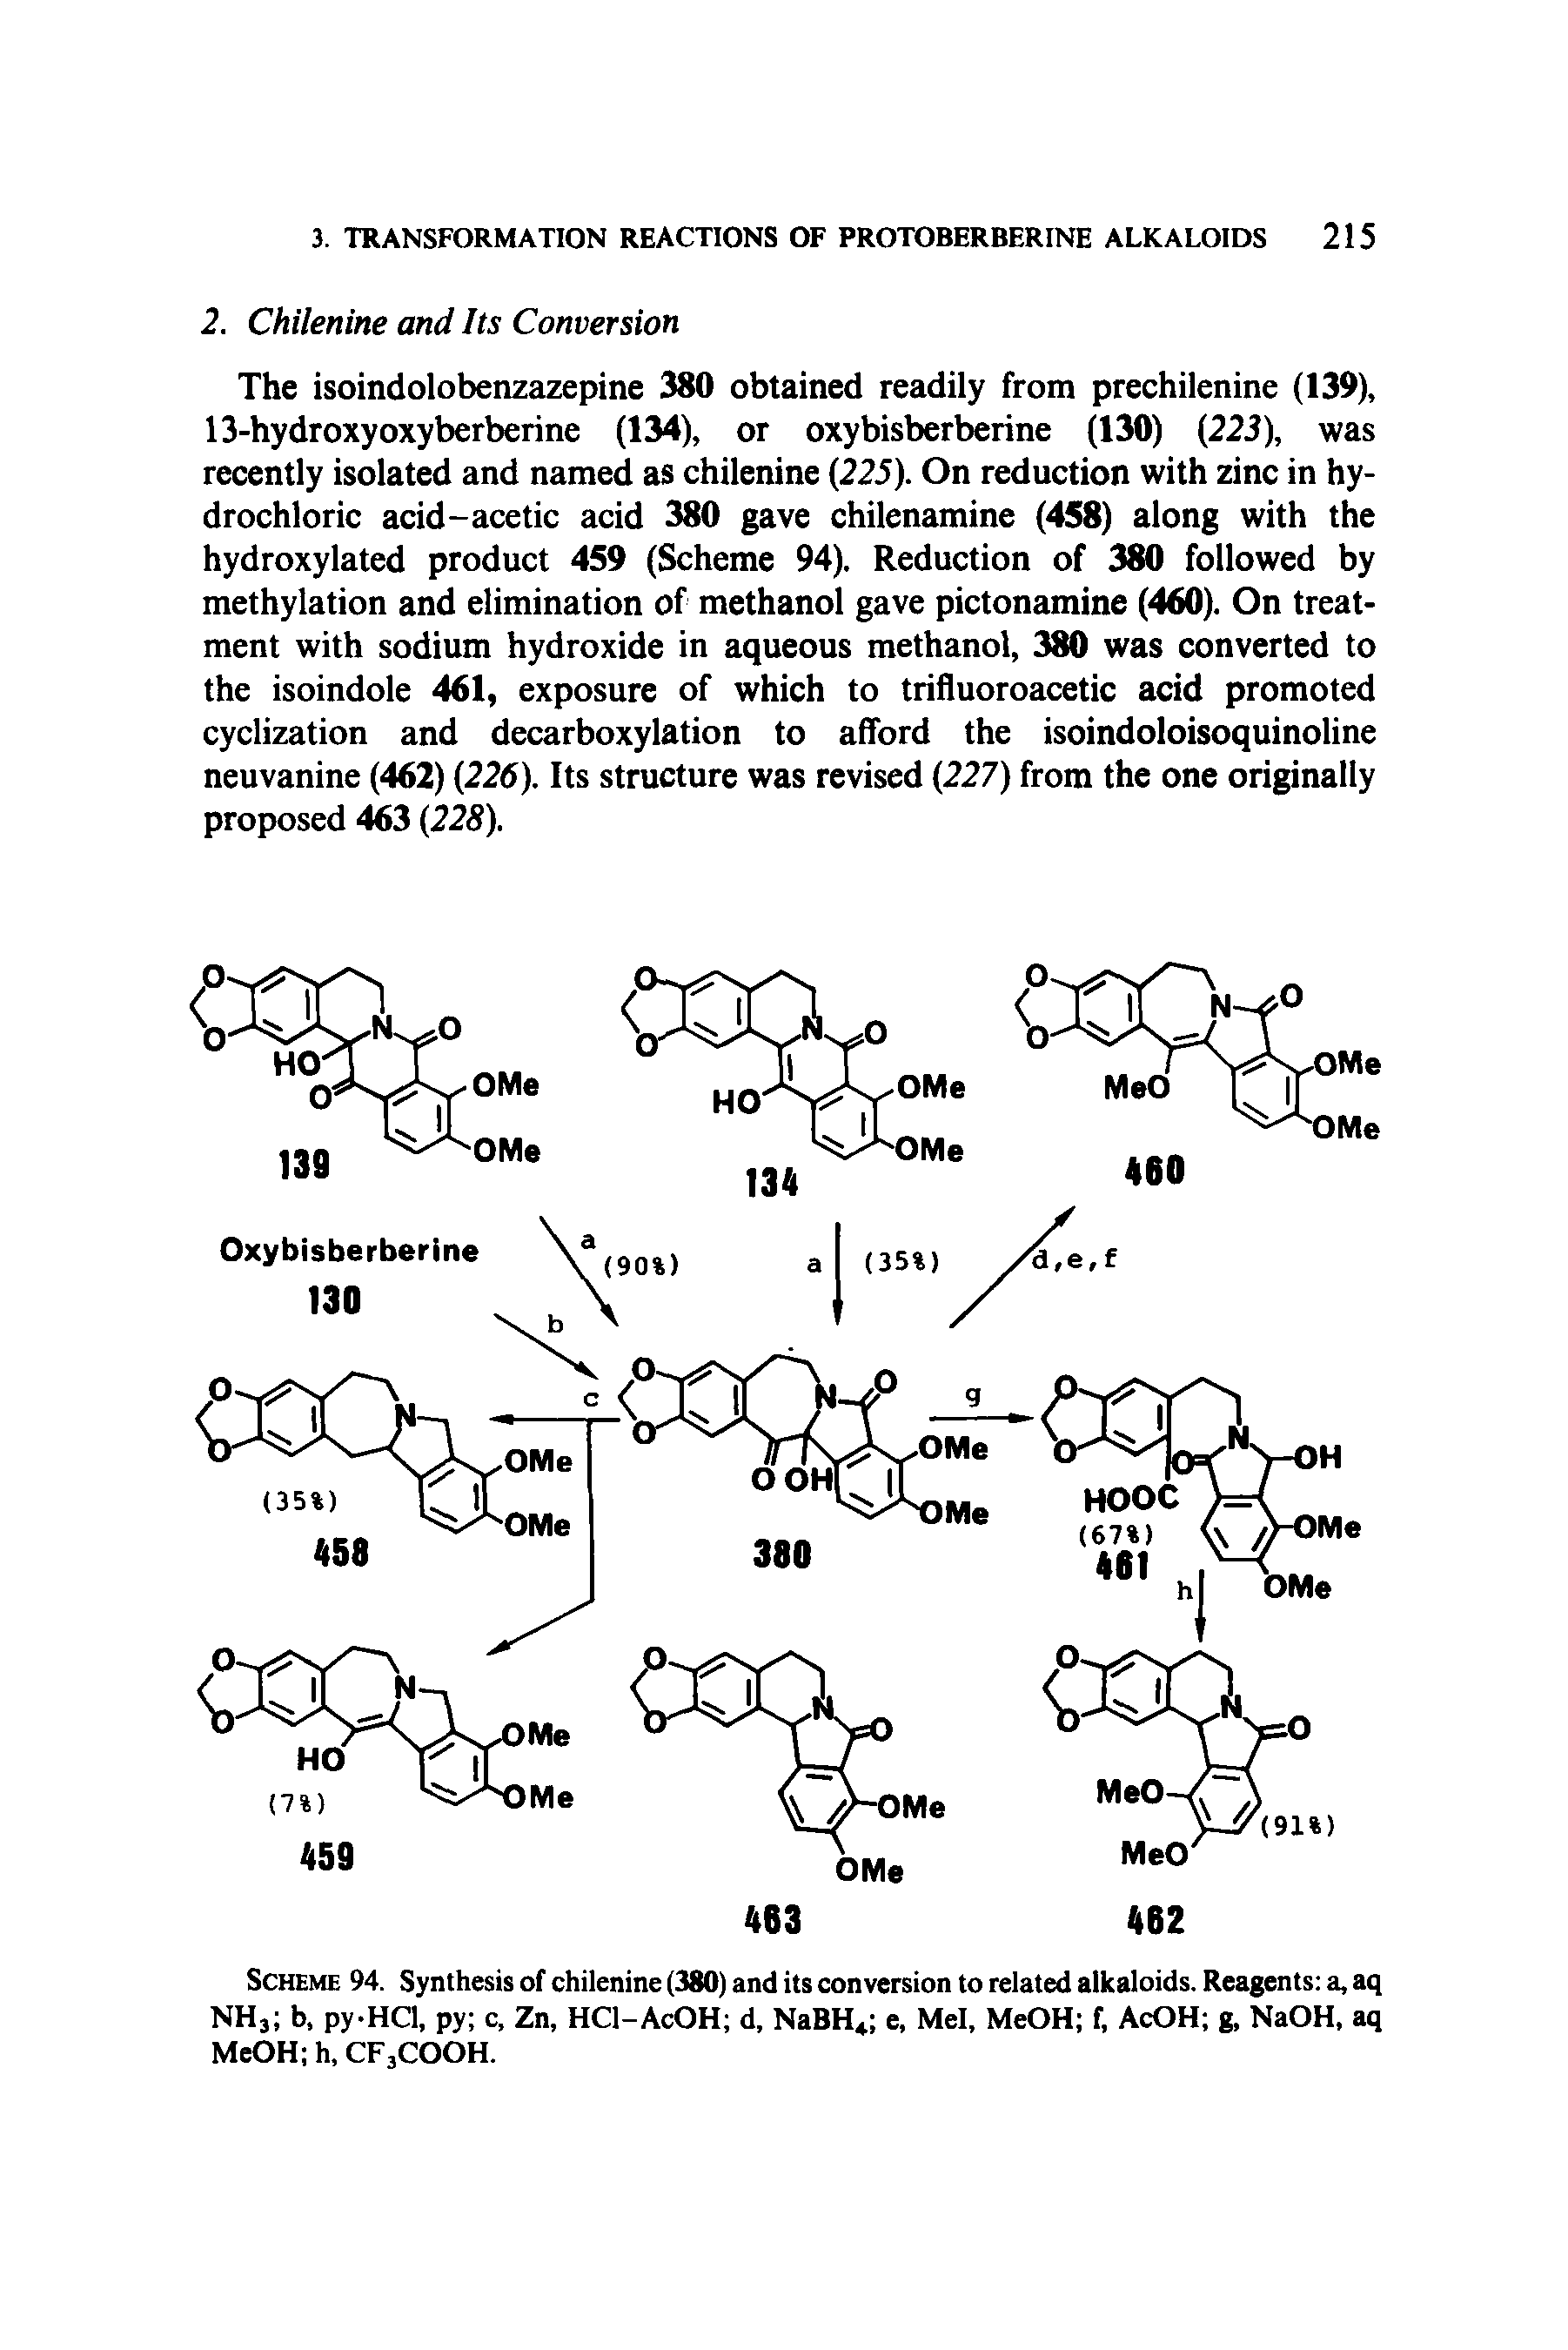 Scheme 94. Synthesis of chilenine (380) and its conversion to related alkaloids. Reagents a, aq NH3 b, py-HCl, py c, Zn, HCl-AcOH d, NaBH4 e, Mel, MeOH f, AcOH g, NaOH, aq MeOH h, CF3COOH.